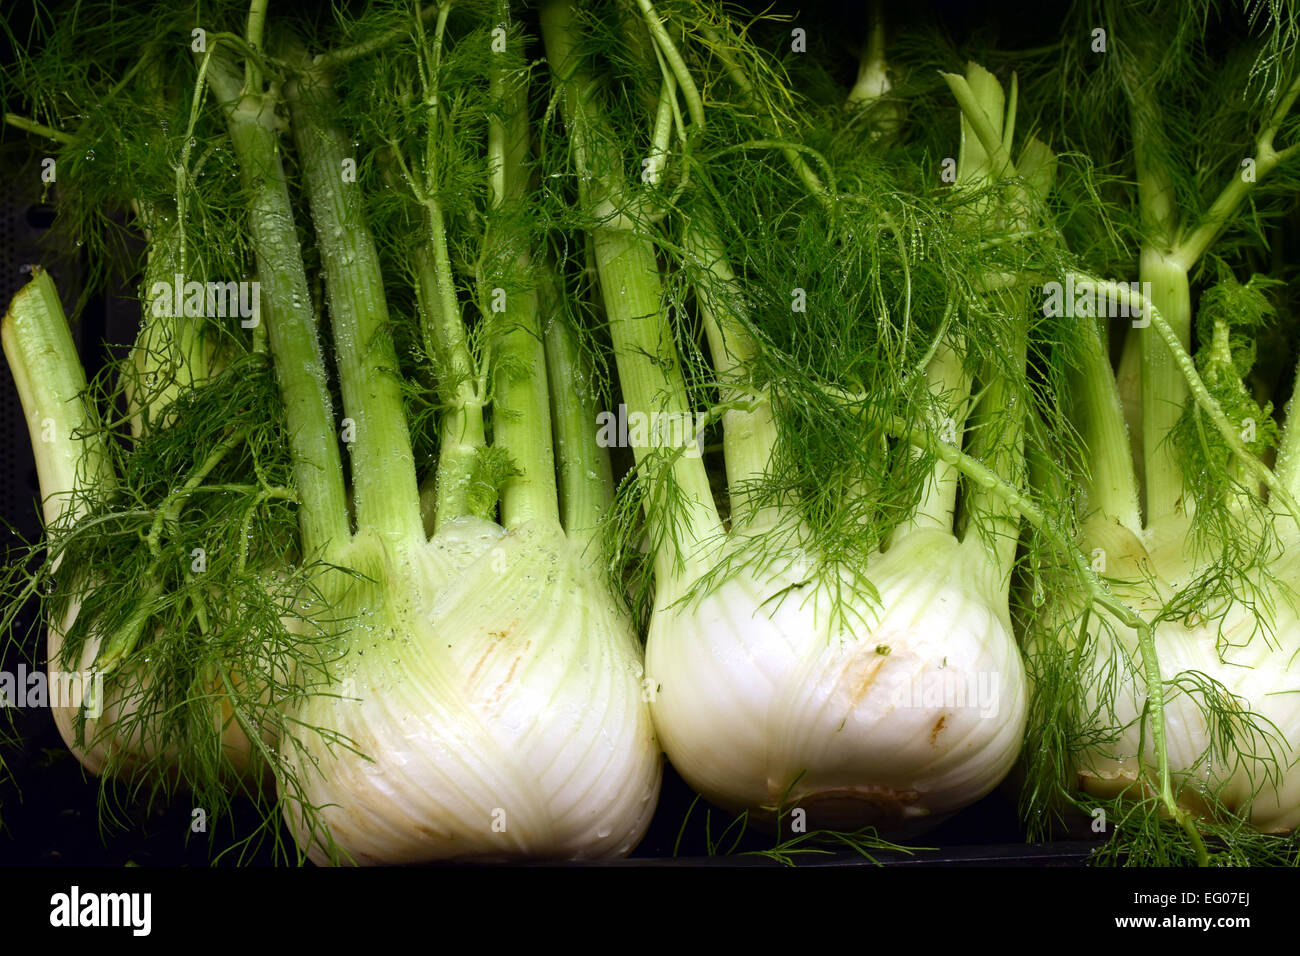 Beautiful Florence fennel, vegetable, were selected to be photographed Stock Photo